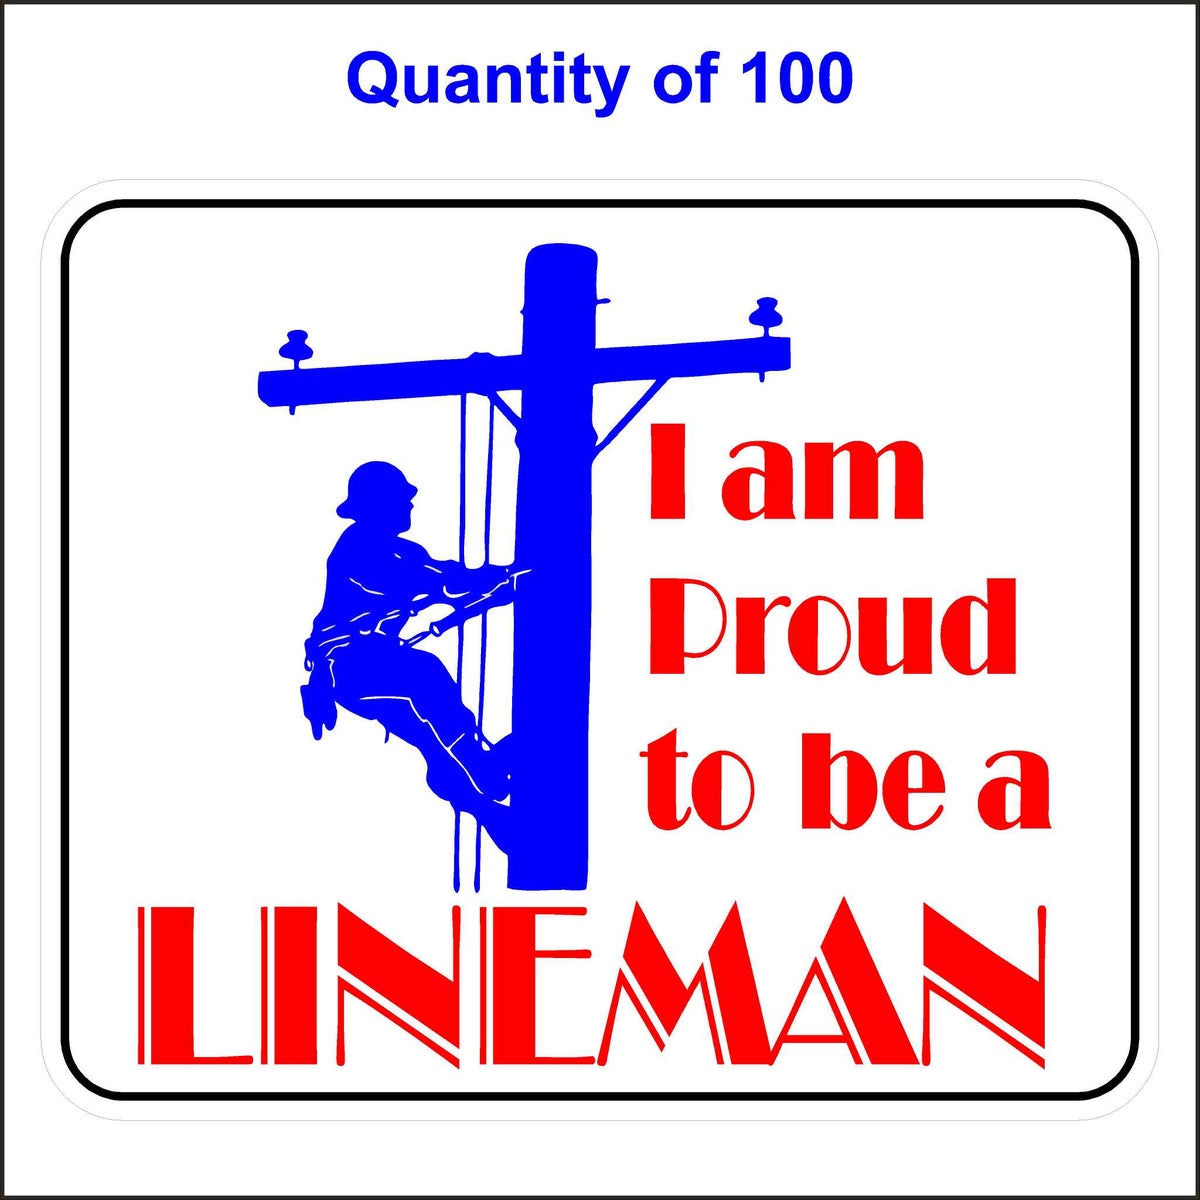 I Am Proud to Be a Lineman Sticker. 100 Quantity.